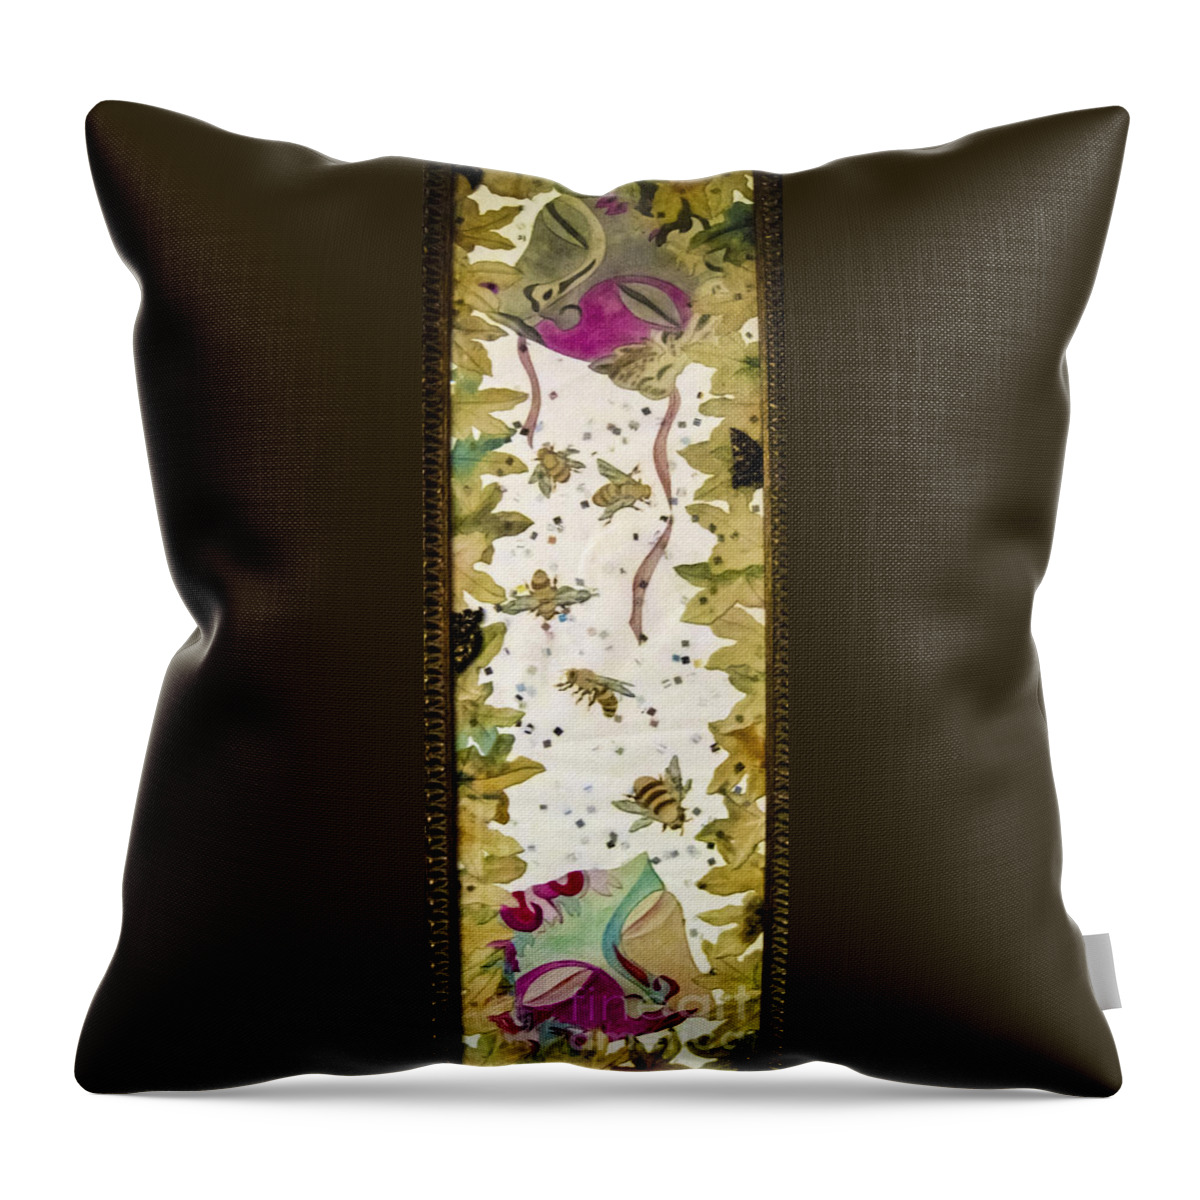 Insects Throw Pillow featuring the glass art Forgetting #5 by Alone Larsen